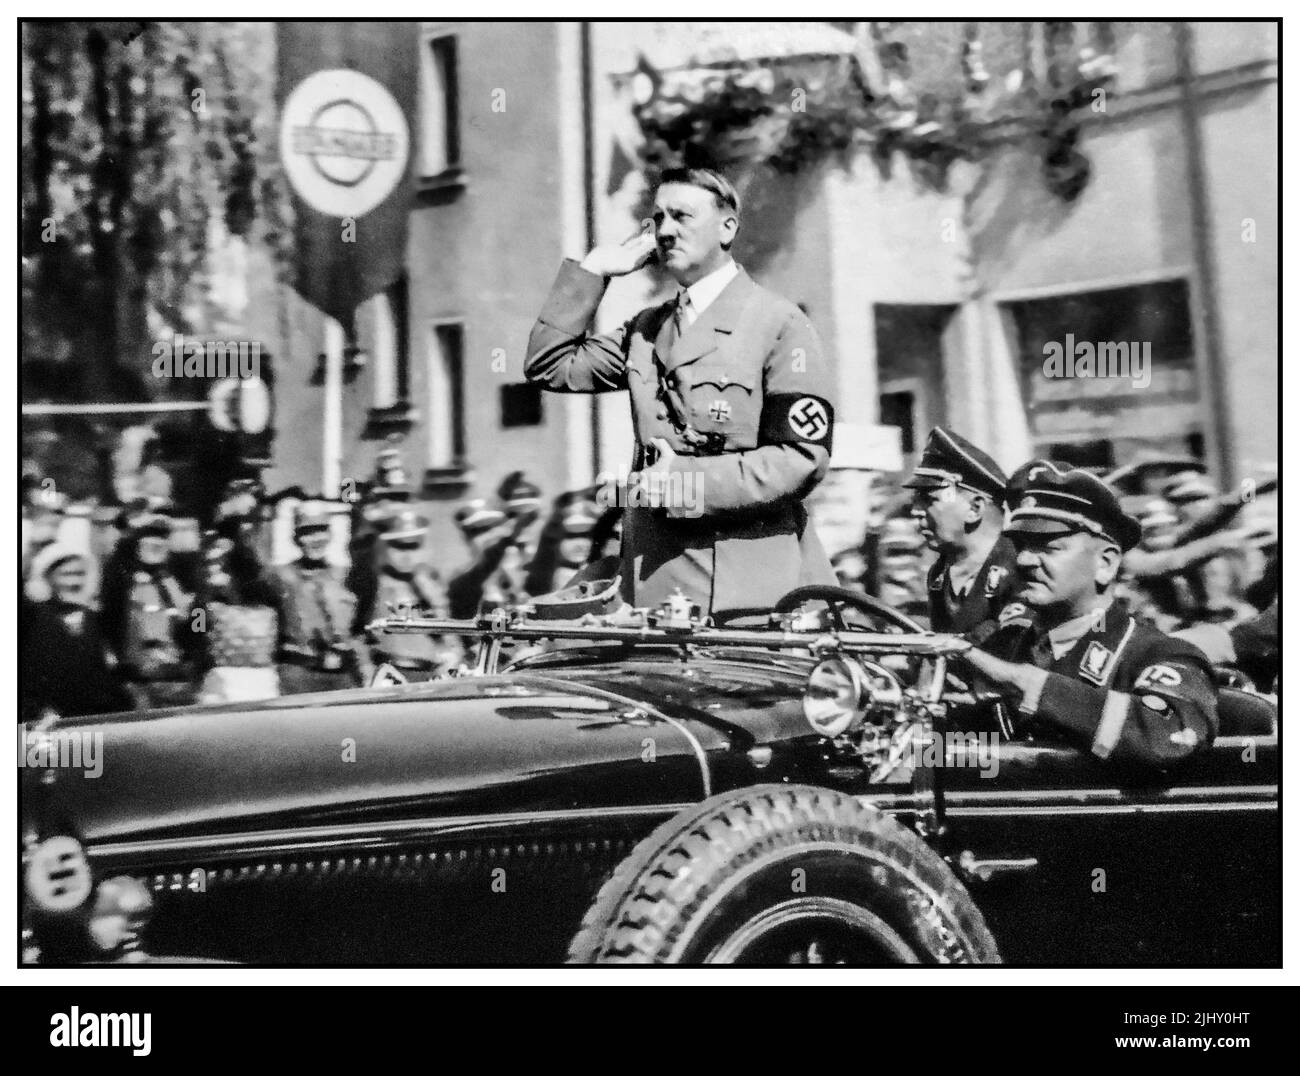 Adolf Hitler standing in his open top Mercedes Motor Car, saluting to his troops and welcoming crowds giving Heil Hitler salutes Nazi Germany 1930s Stock Photo